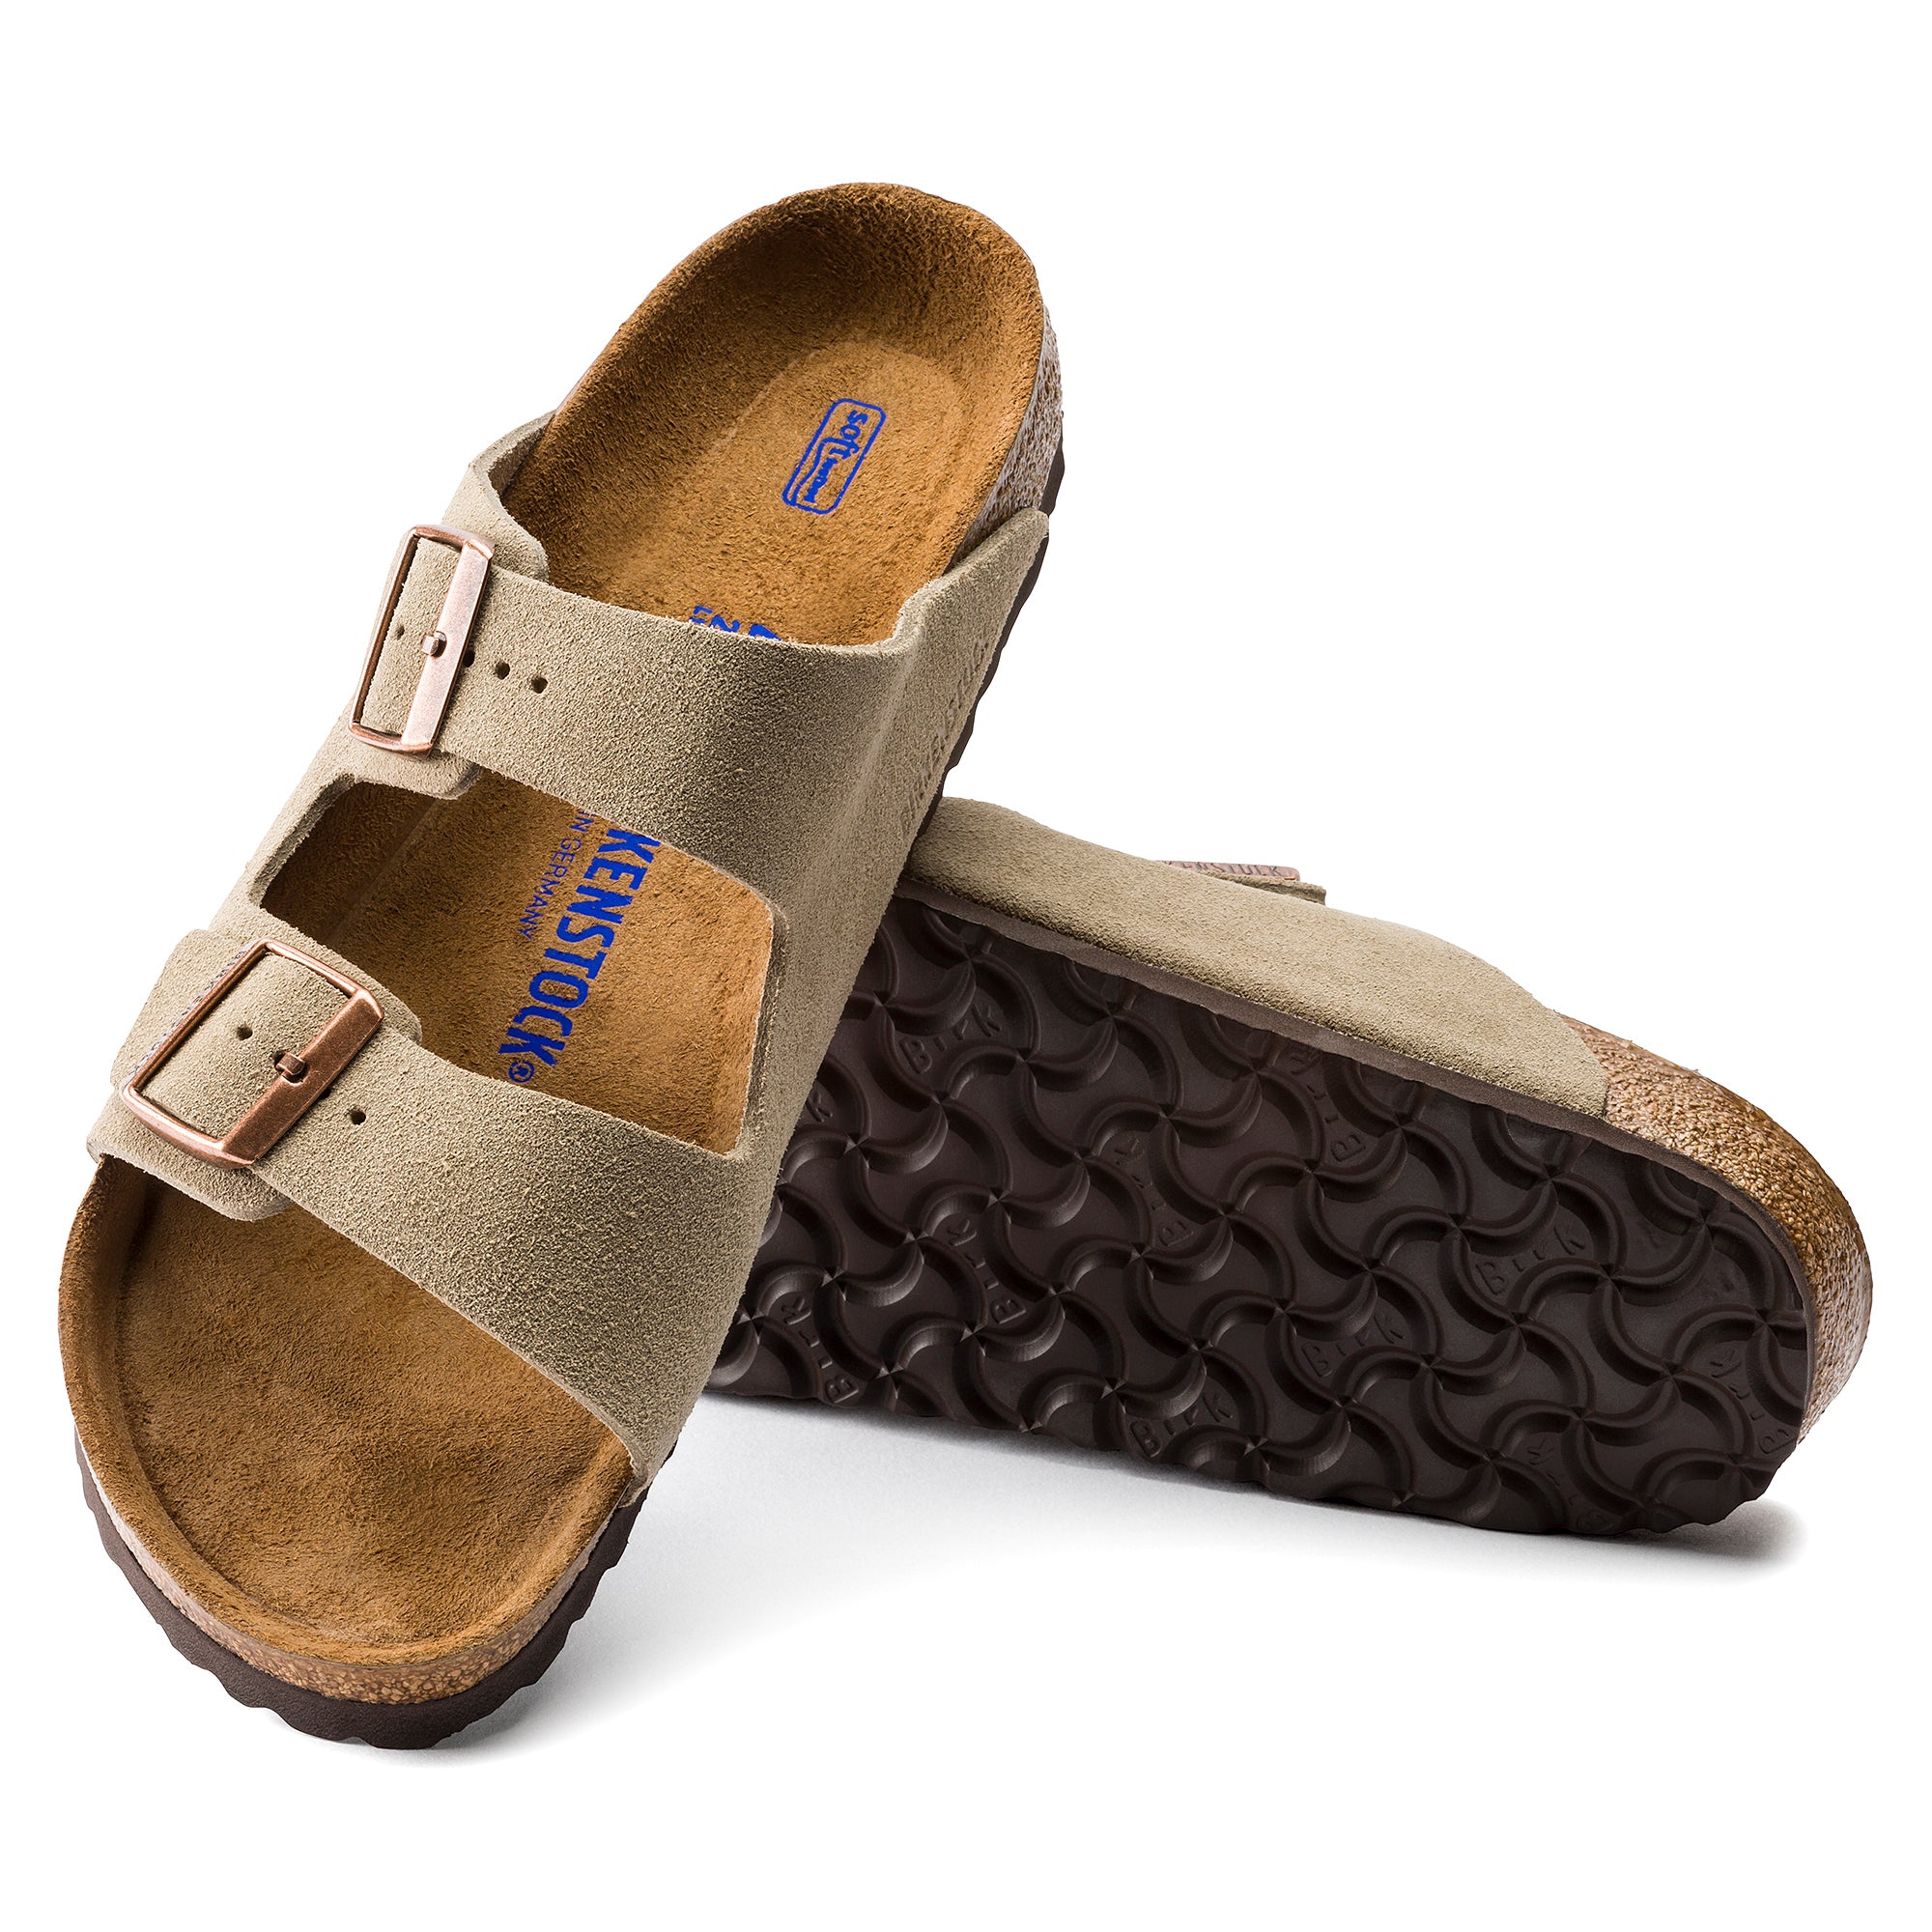 Arizona Soft Footbed - Suede Leather - 0